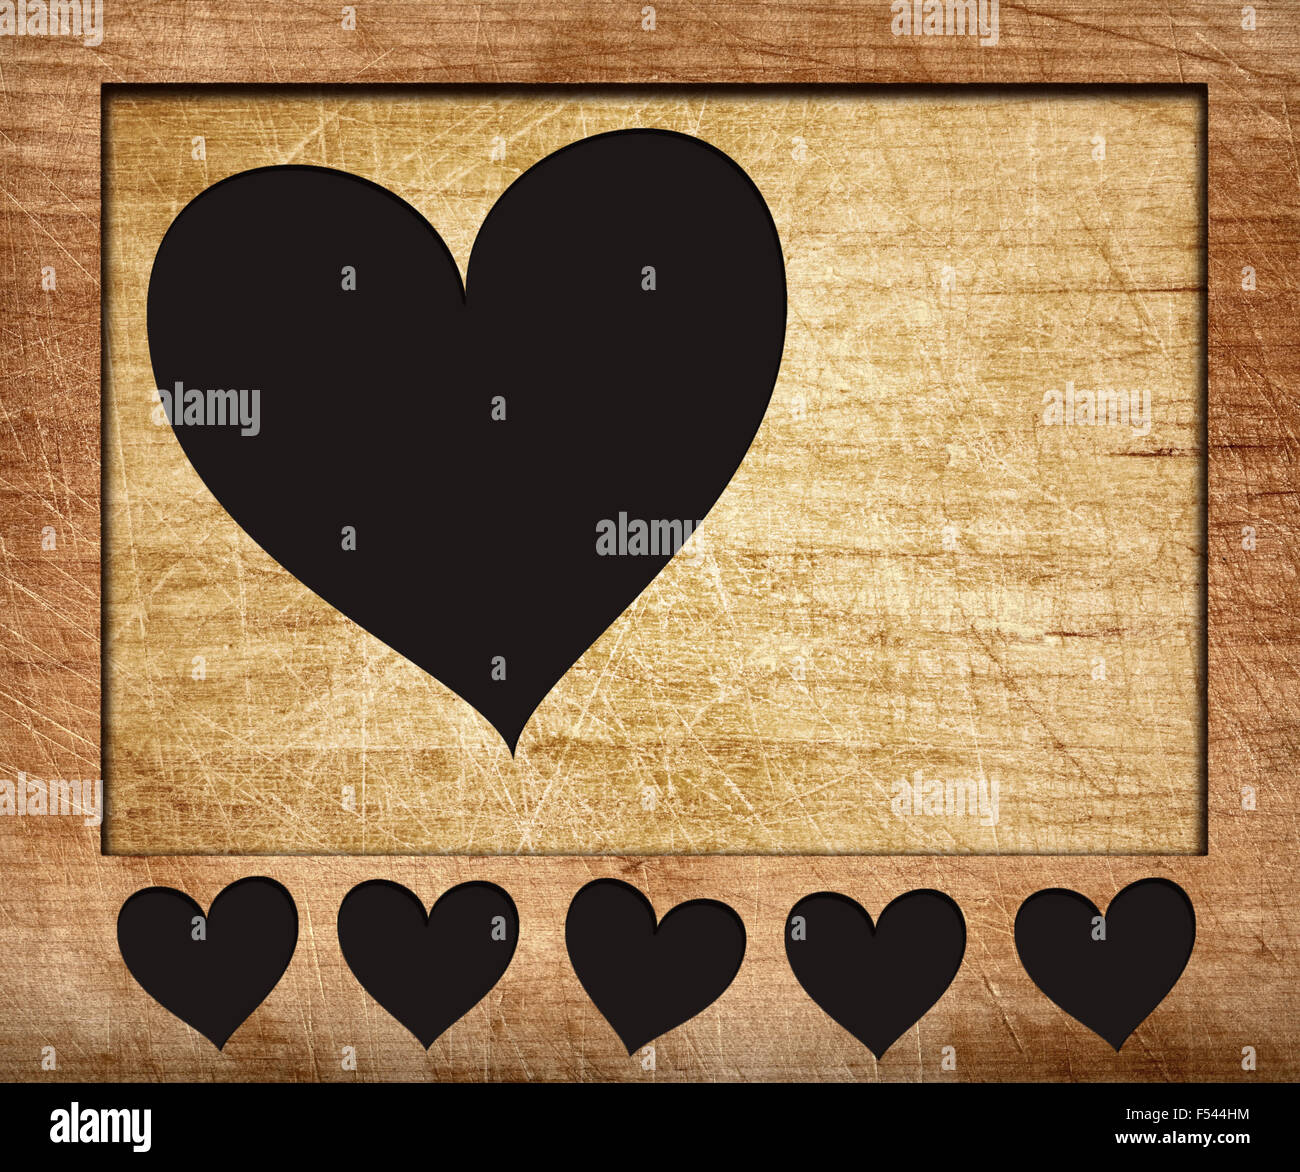 Hearts shape cut on wooden board with frame Stock Photo